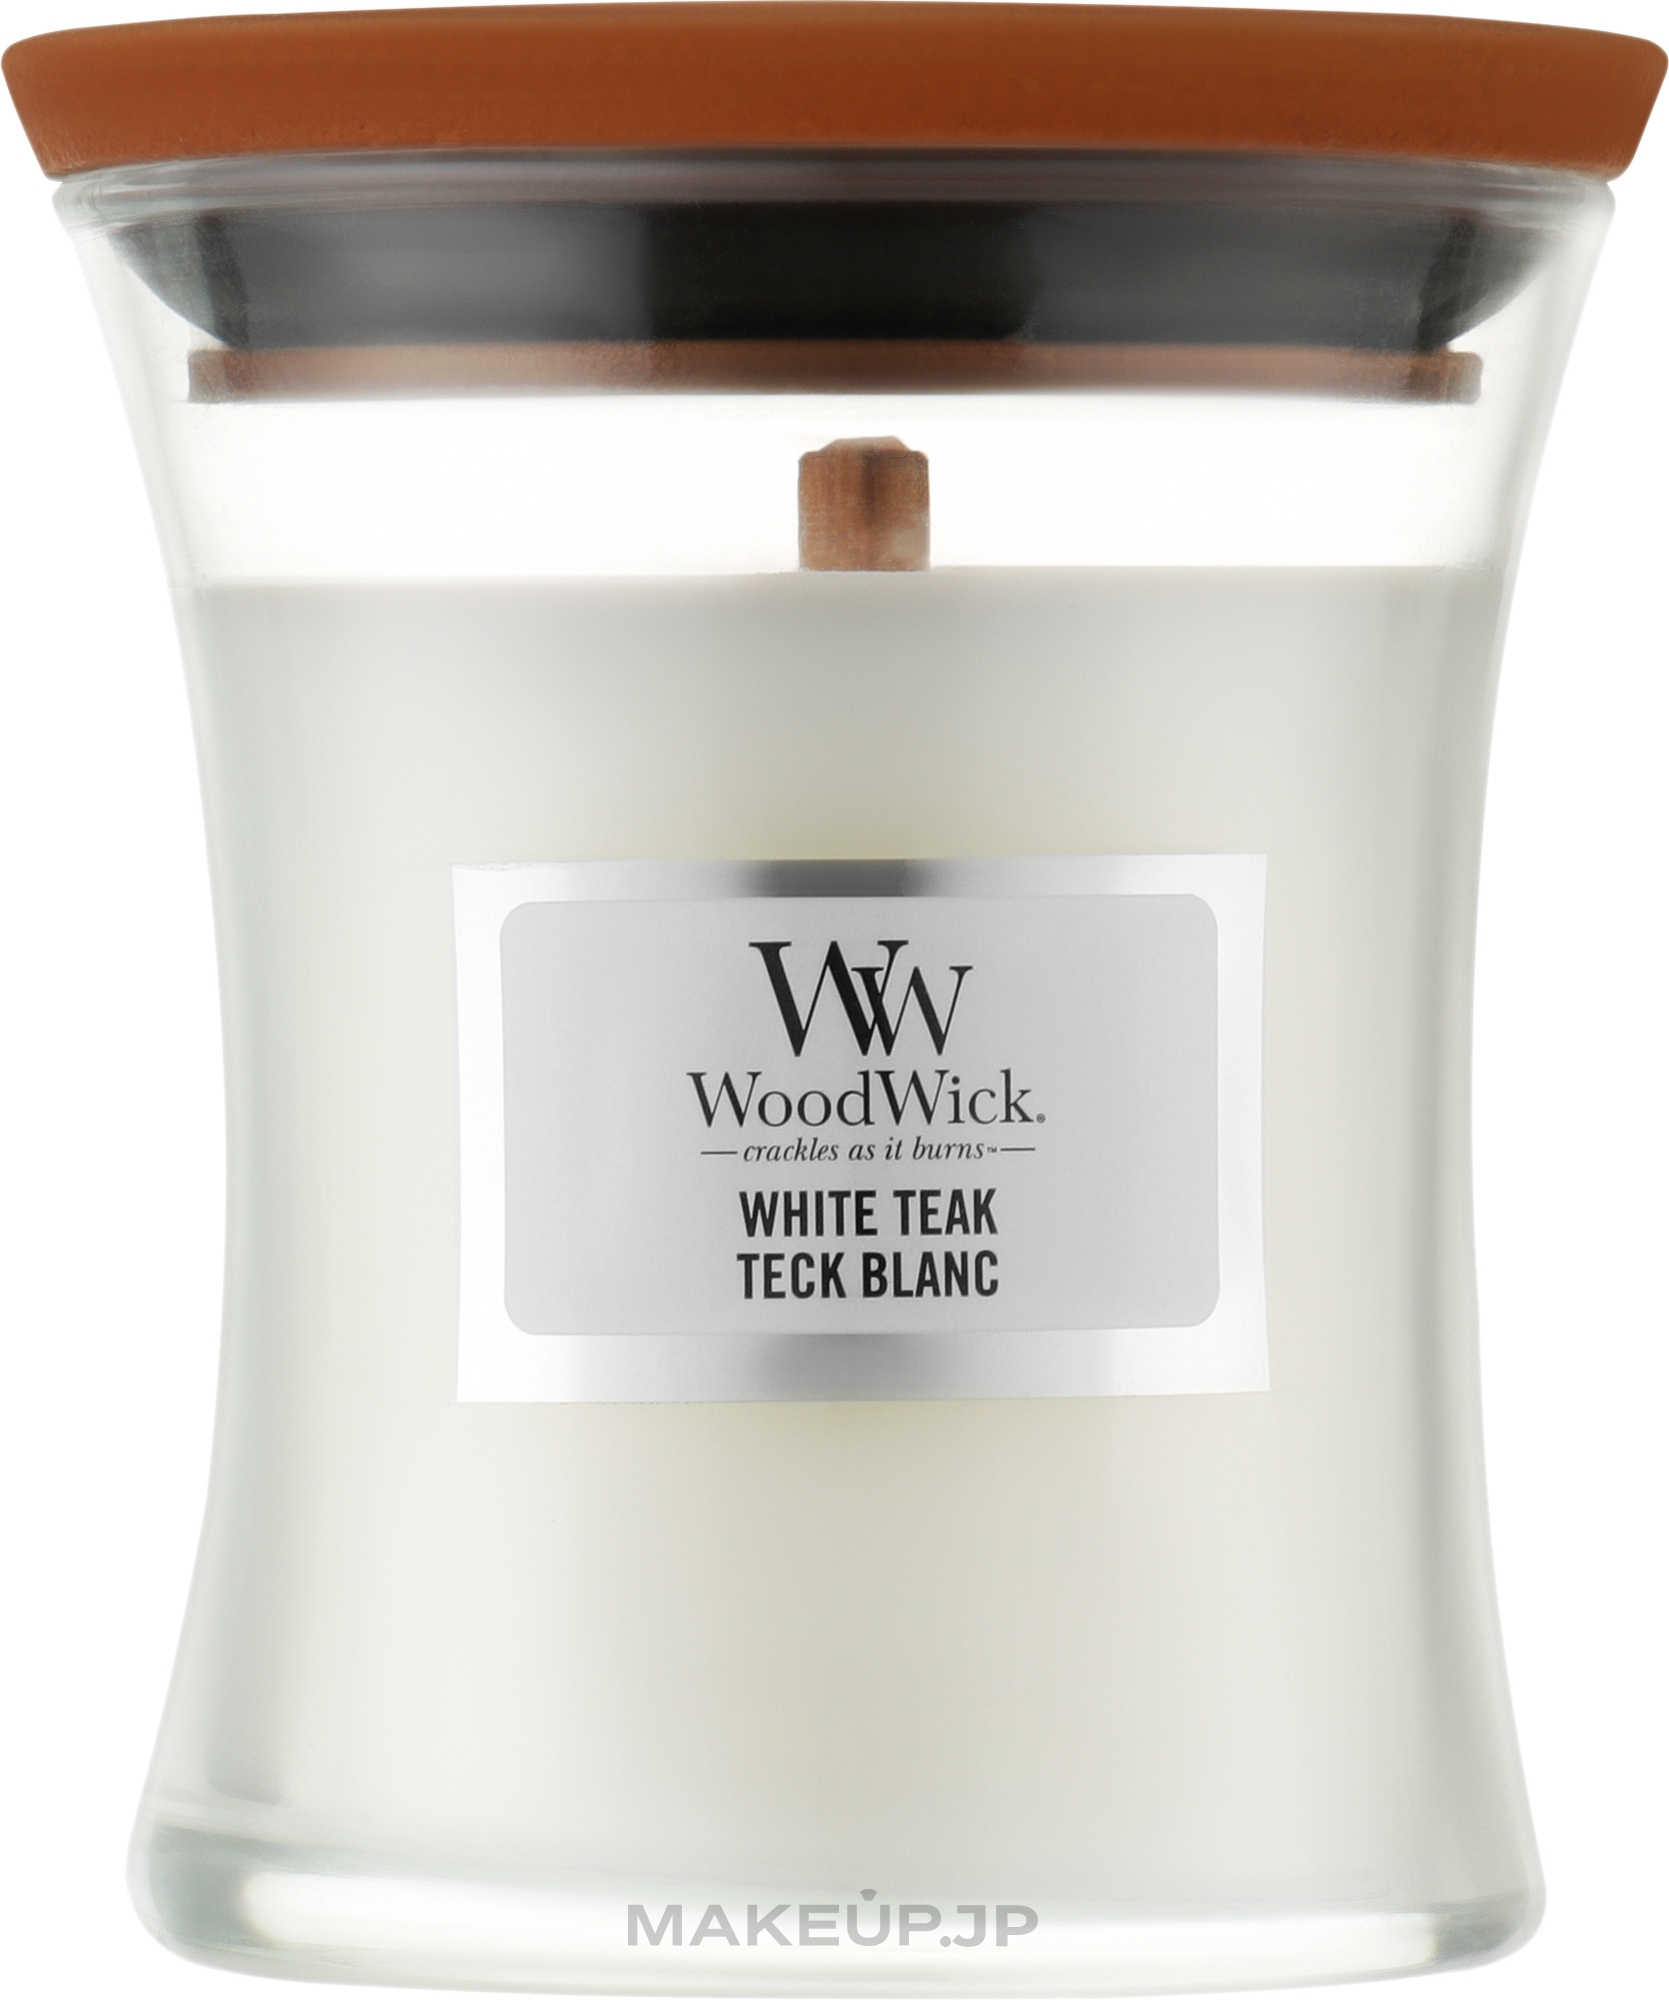 Scented Candle - WoodWick Hourglass White Teak Teck Blanc  — photo 85 g